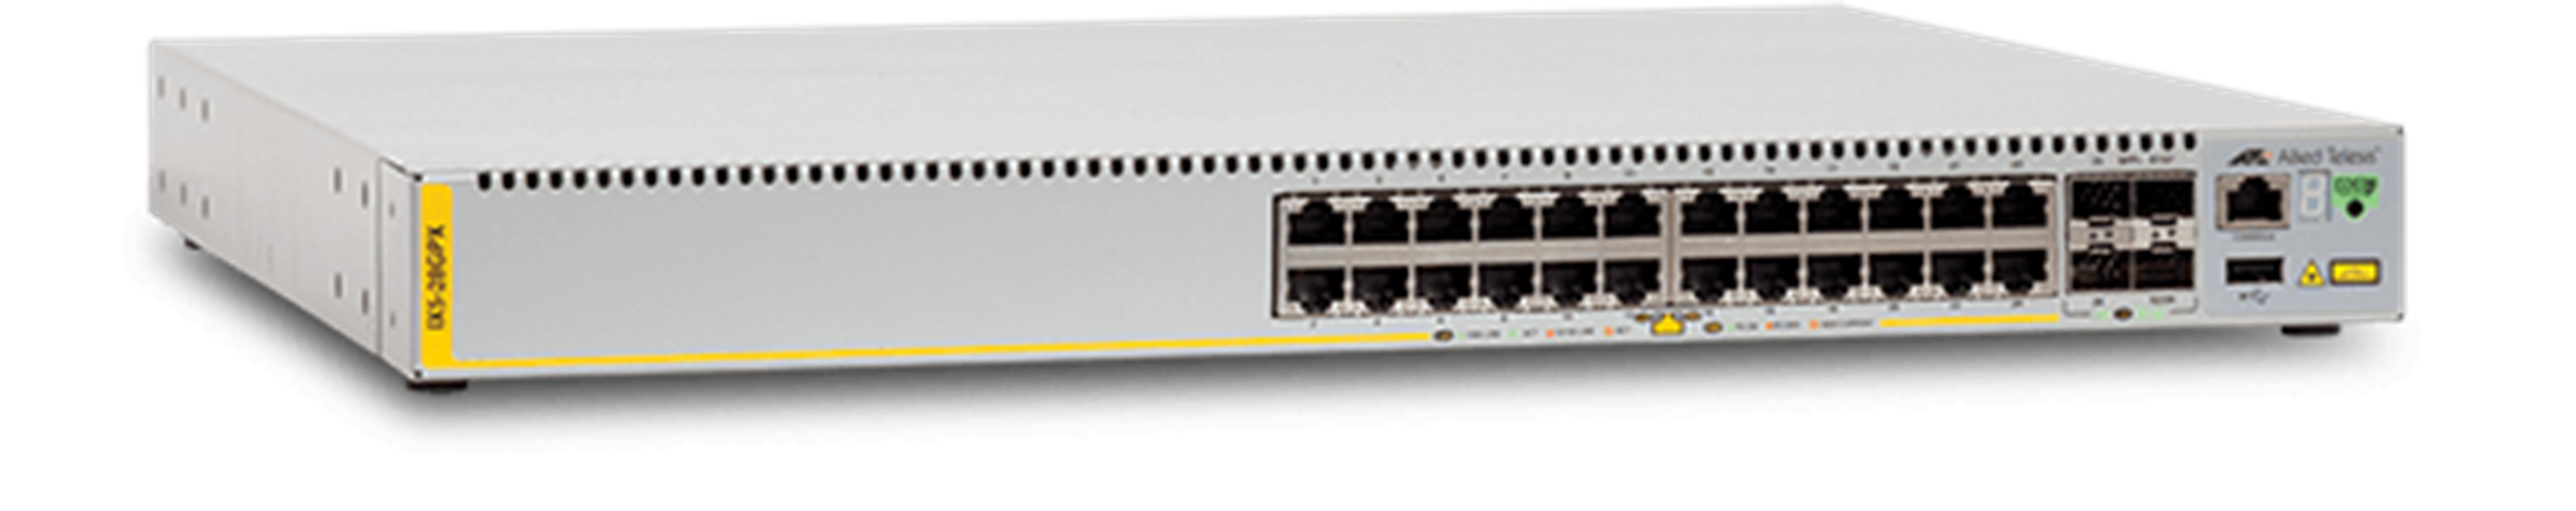 AT-IX5-28GPX - Advanced Gigabit Layer 3 POE Industial Switch